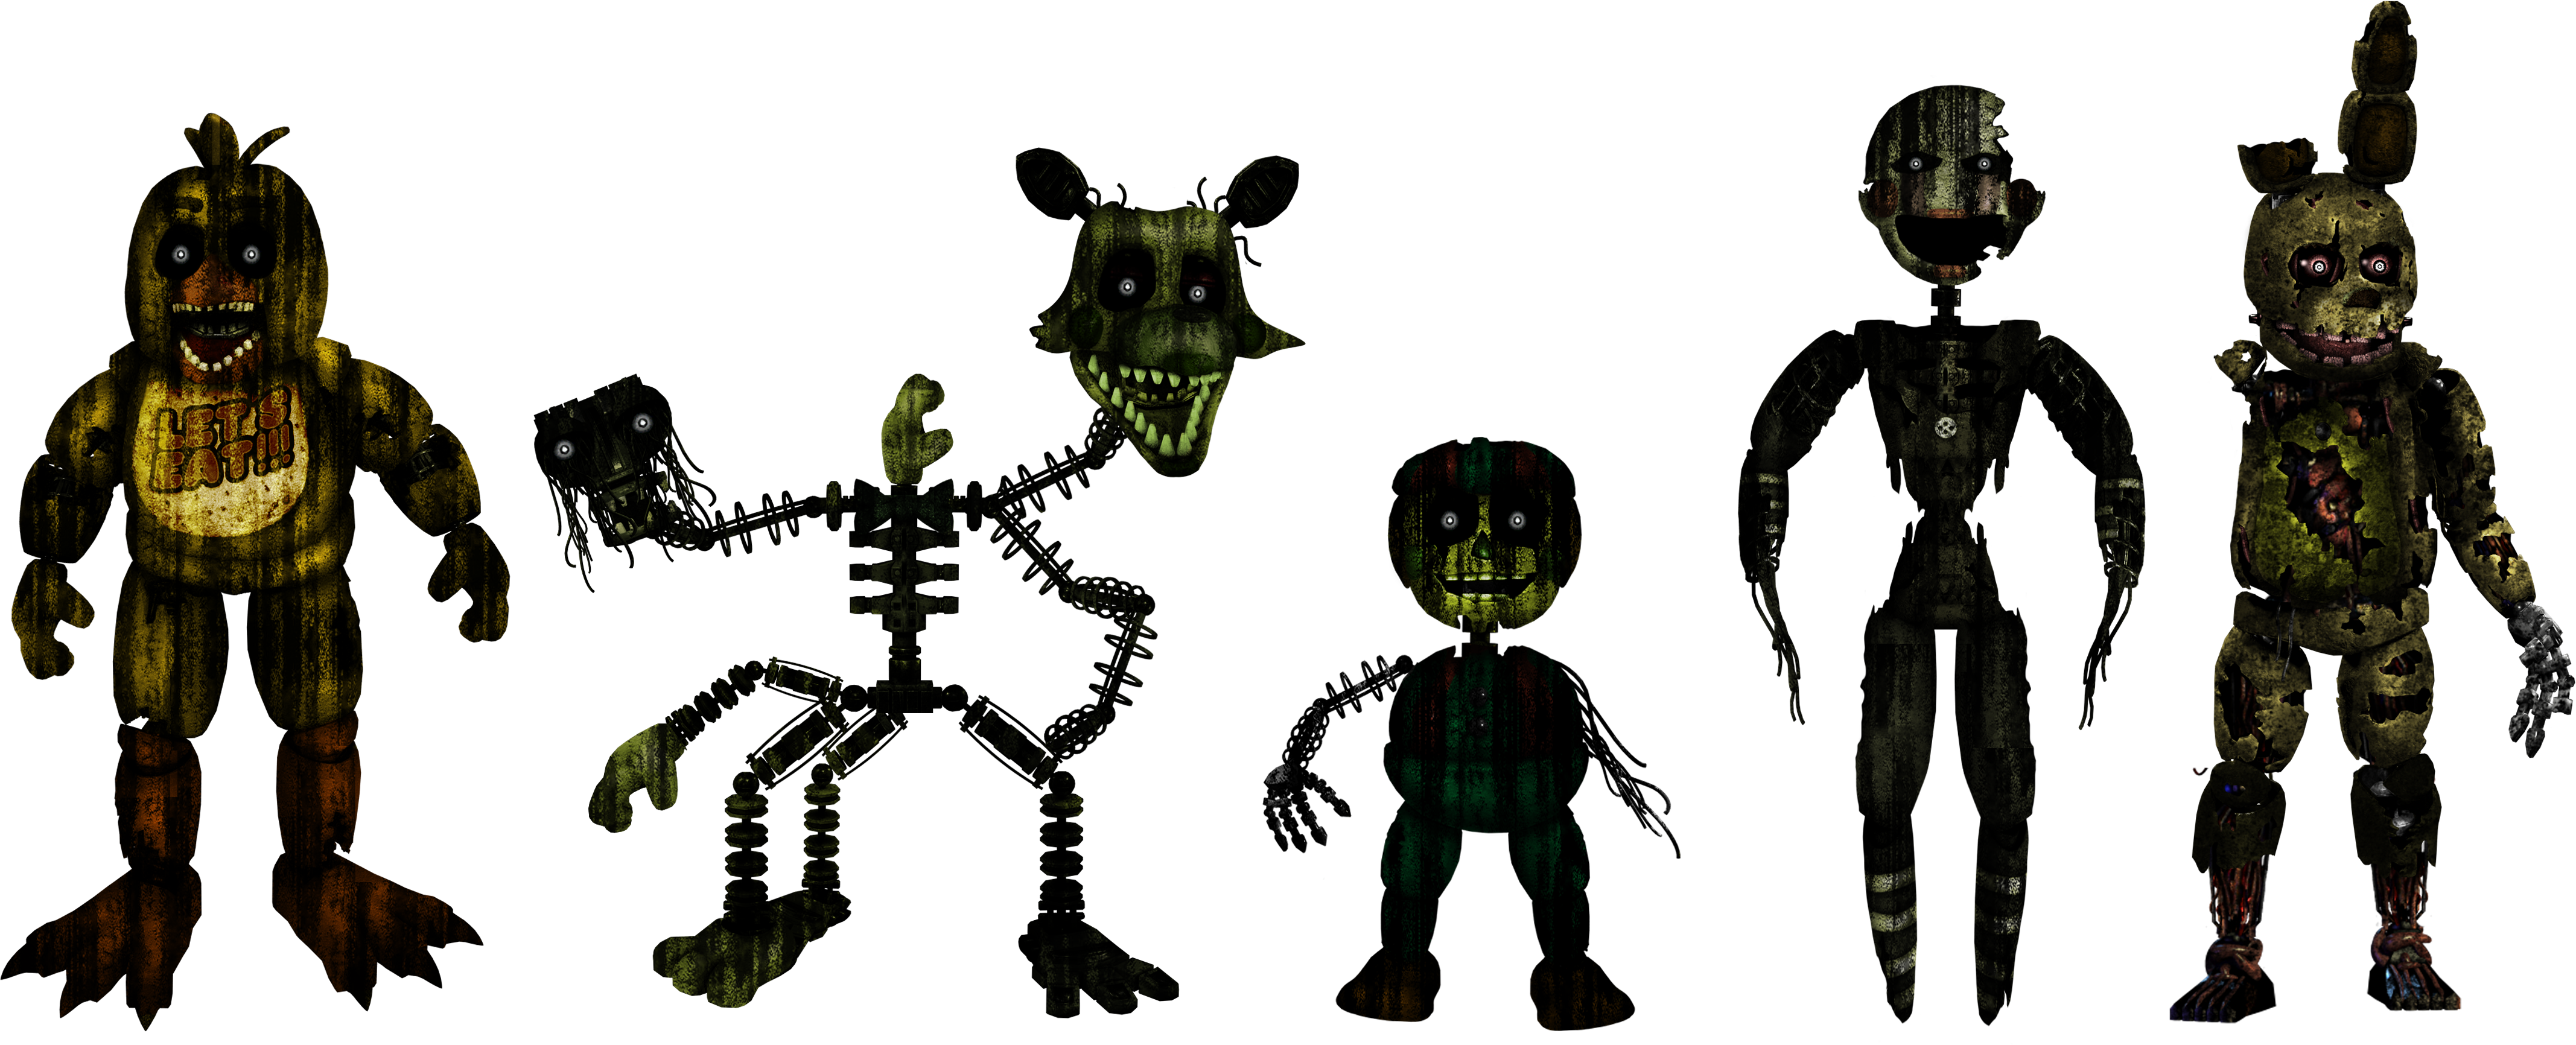 Withered FNaF3 Animatronics by LivingCorpse7 on DeviantArt